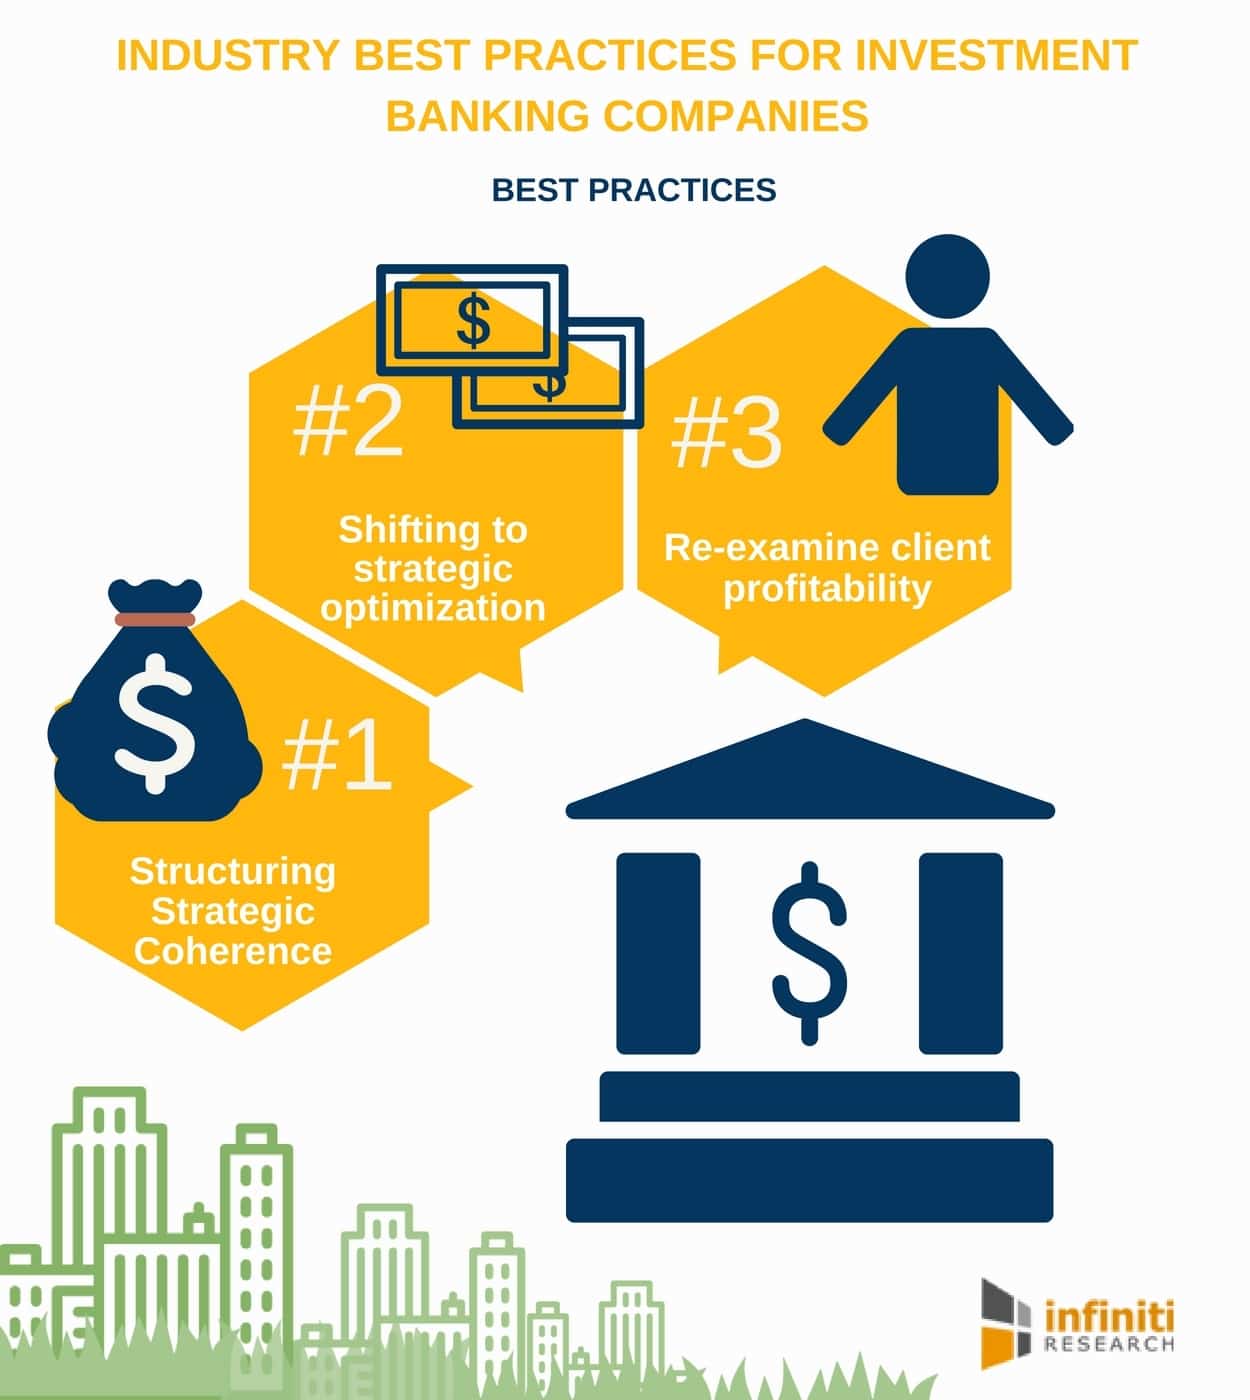 Four Best Practices for Investment Banking Companies